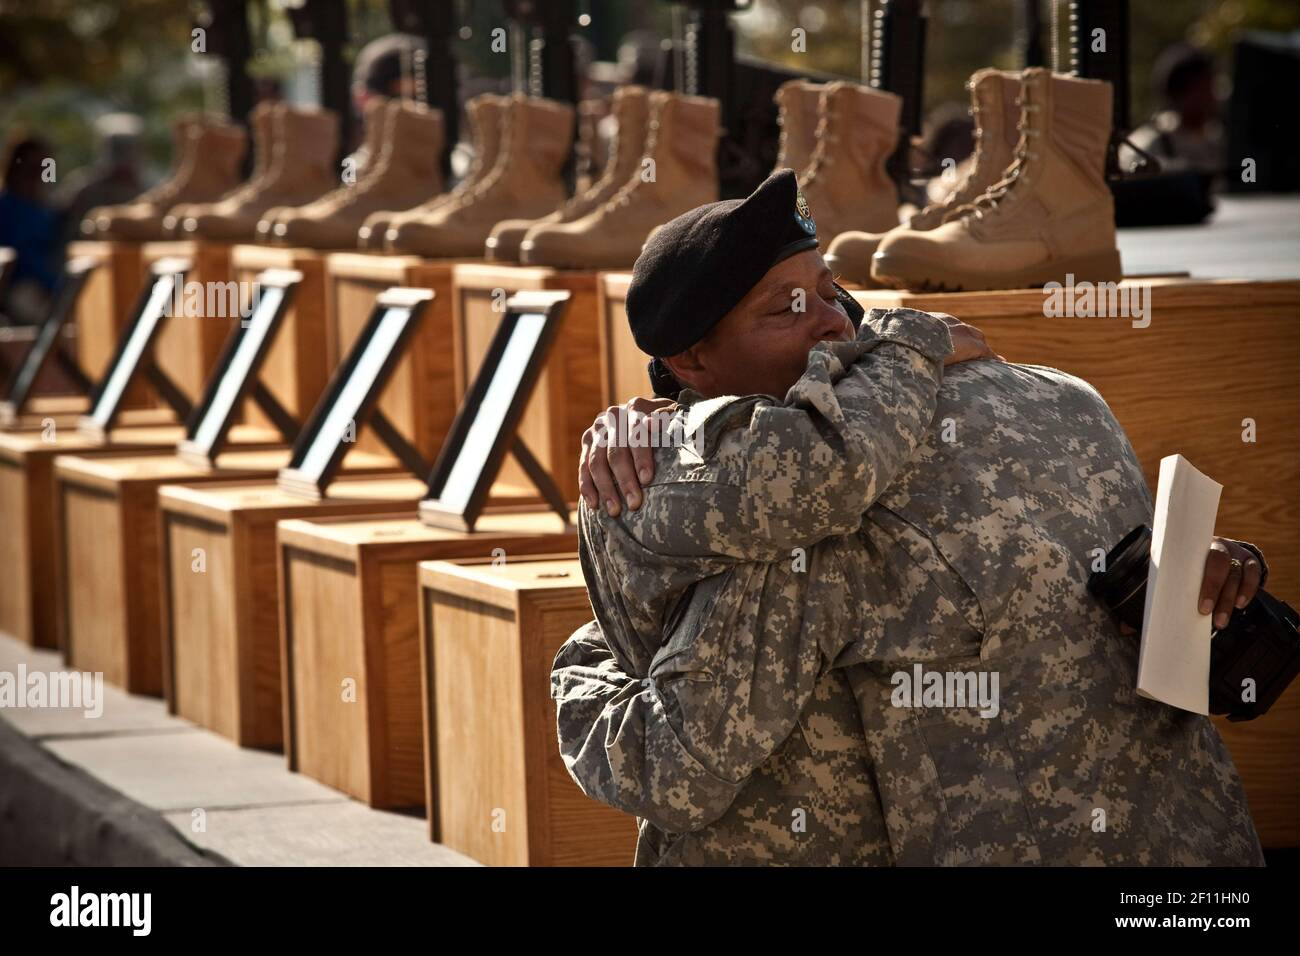 10 November 2009 - Fort Hood, Texas - Soldiers pay tribute and mourn the loss of the victims killed in the Fort Hood shooting spree last Thursday, at Memorial Service in Fort Hood, Texas, on Tuesday Nov 10, 2009. Photo Credit: Erin Trieb/Sipa Press/memorial.039/0911110111 Stock Photo